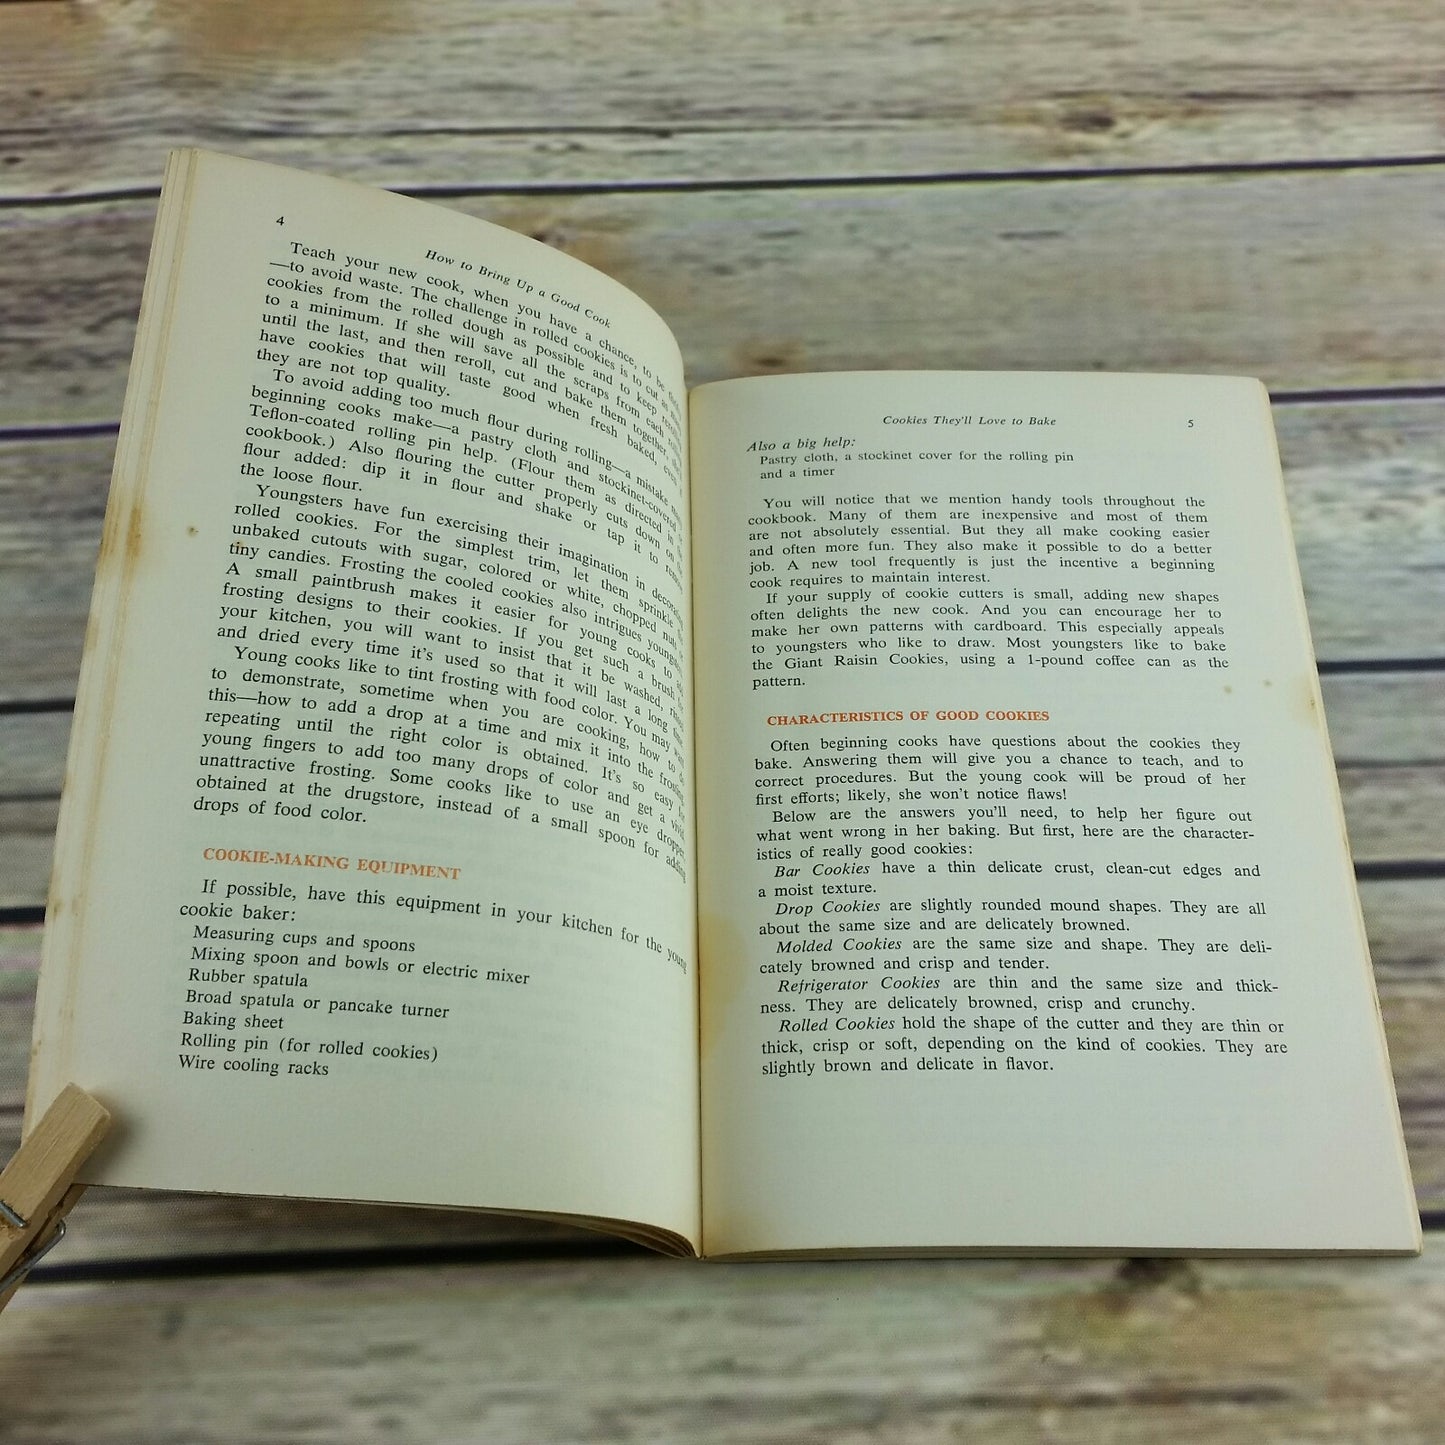 Vintage Cookbook How To Bring Up a Good Cook Farm Journal Food Editors 1966 Booklet - At Grandma's Table